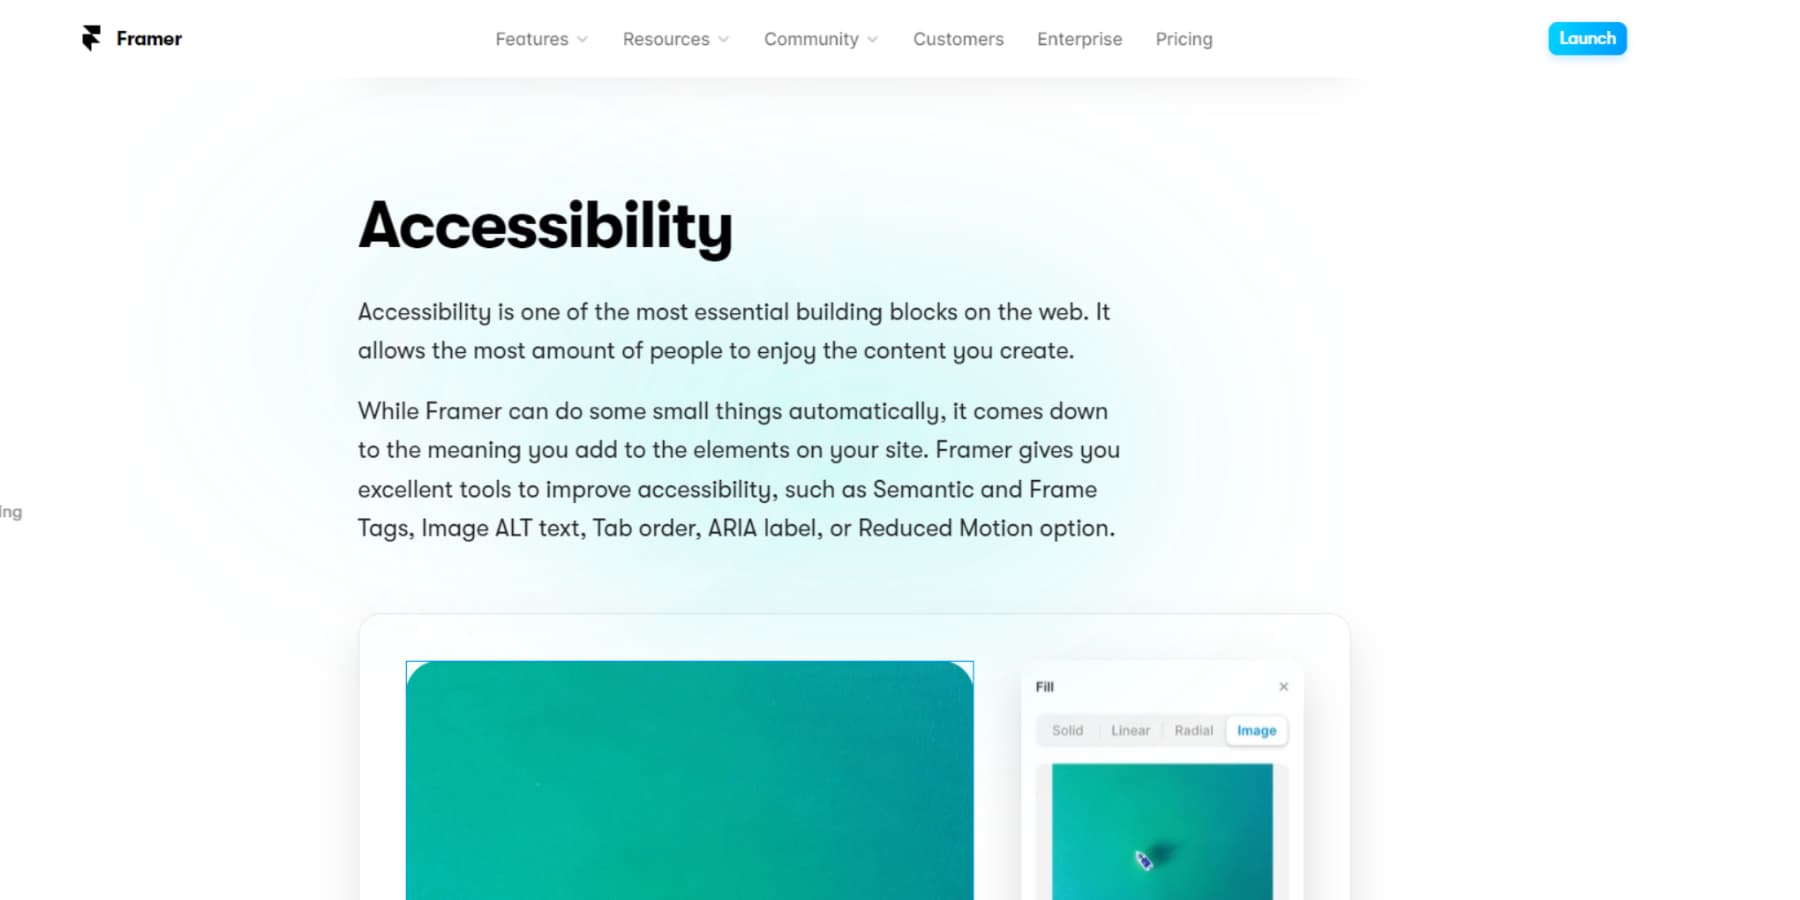 A screenshot of Framer's Accessibility features from their website